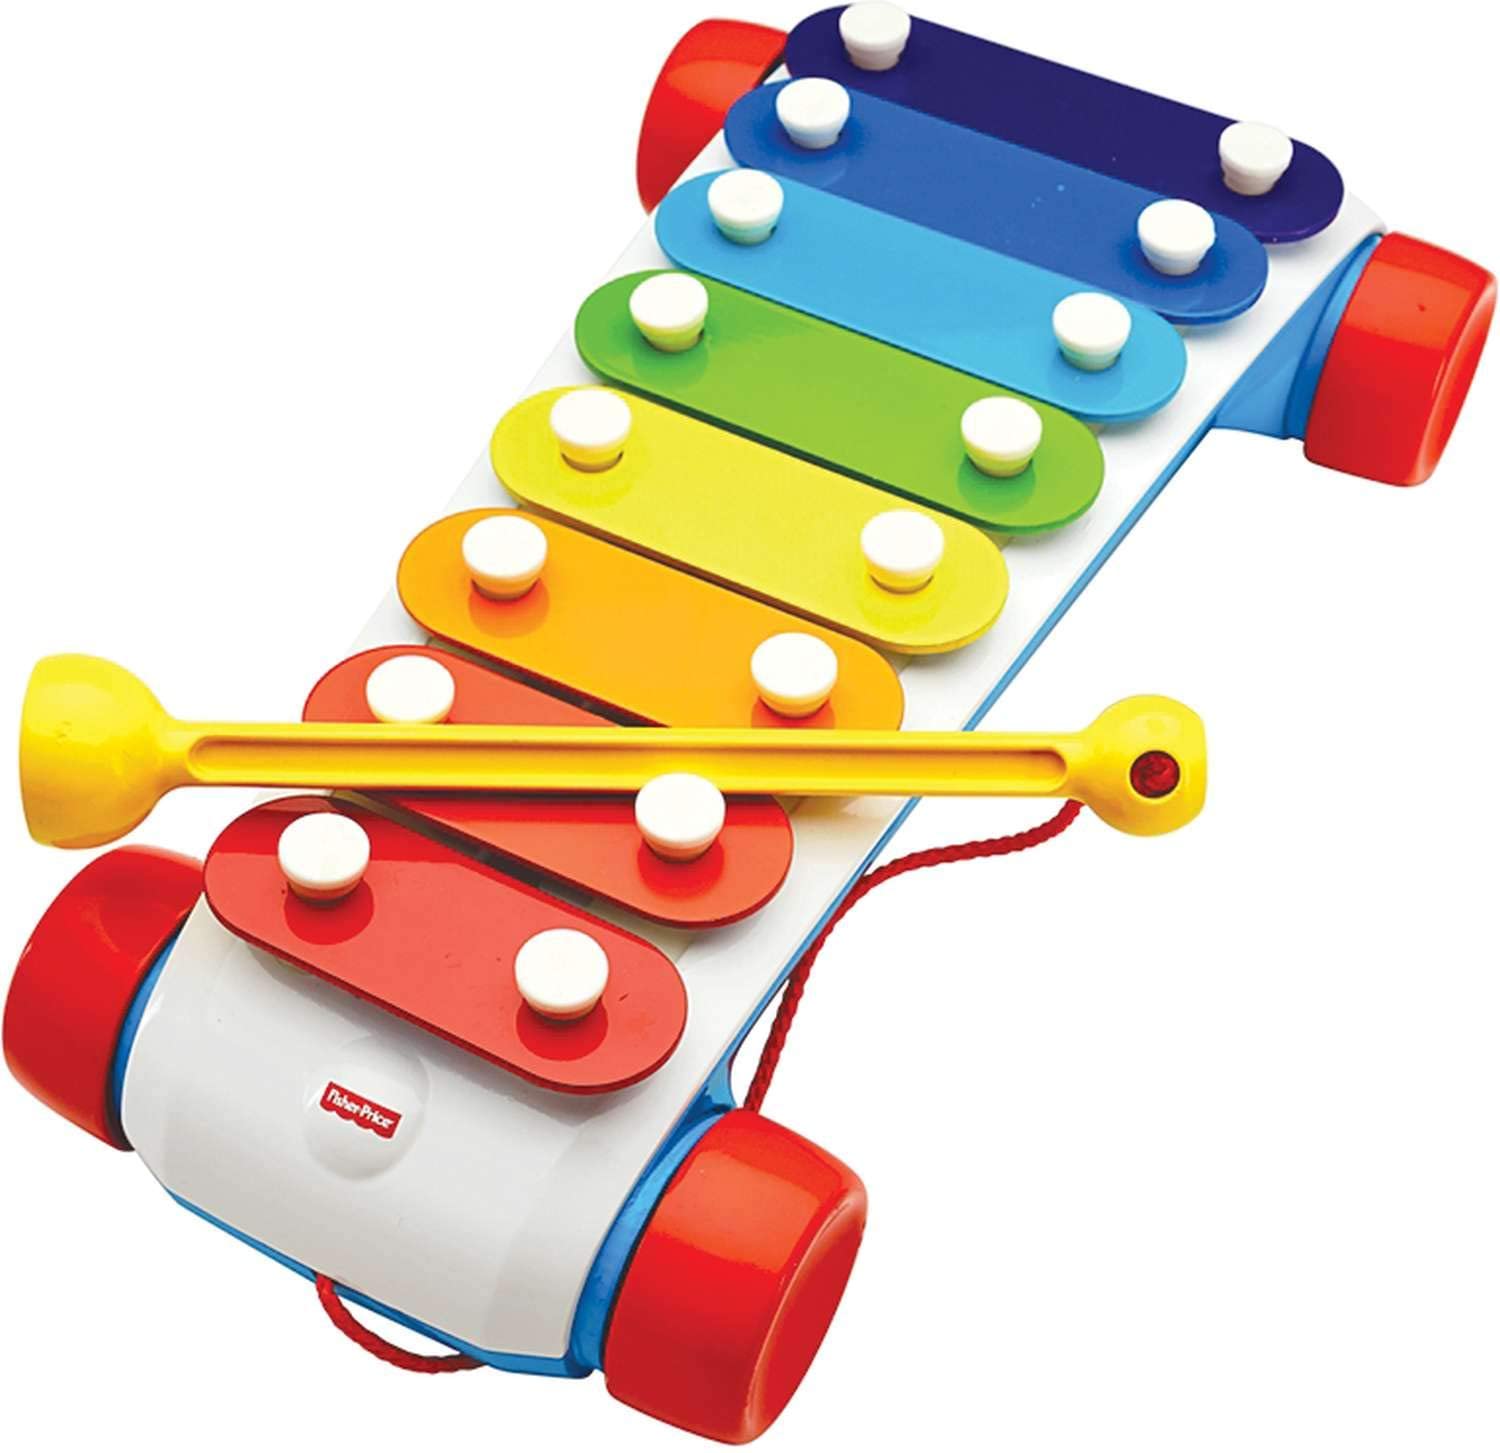 FisherPrice Classic Xylophone One Shop Toy Store New